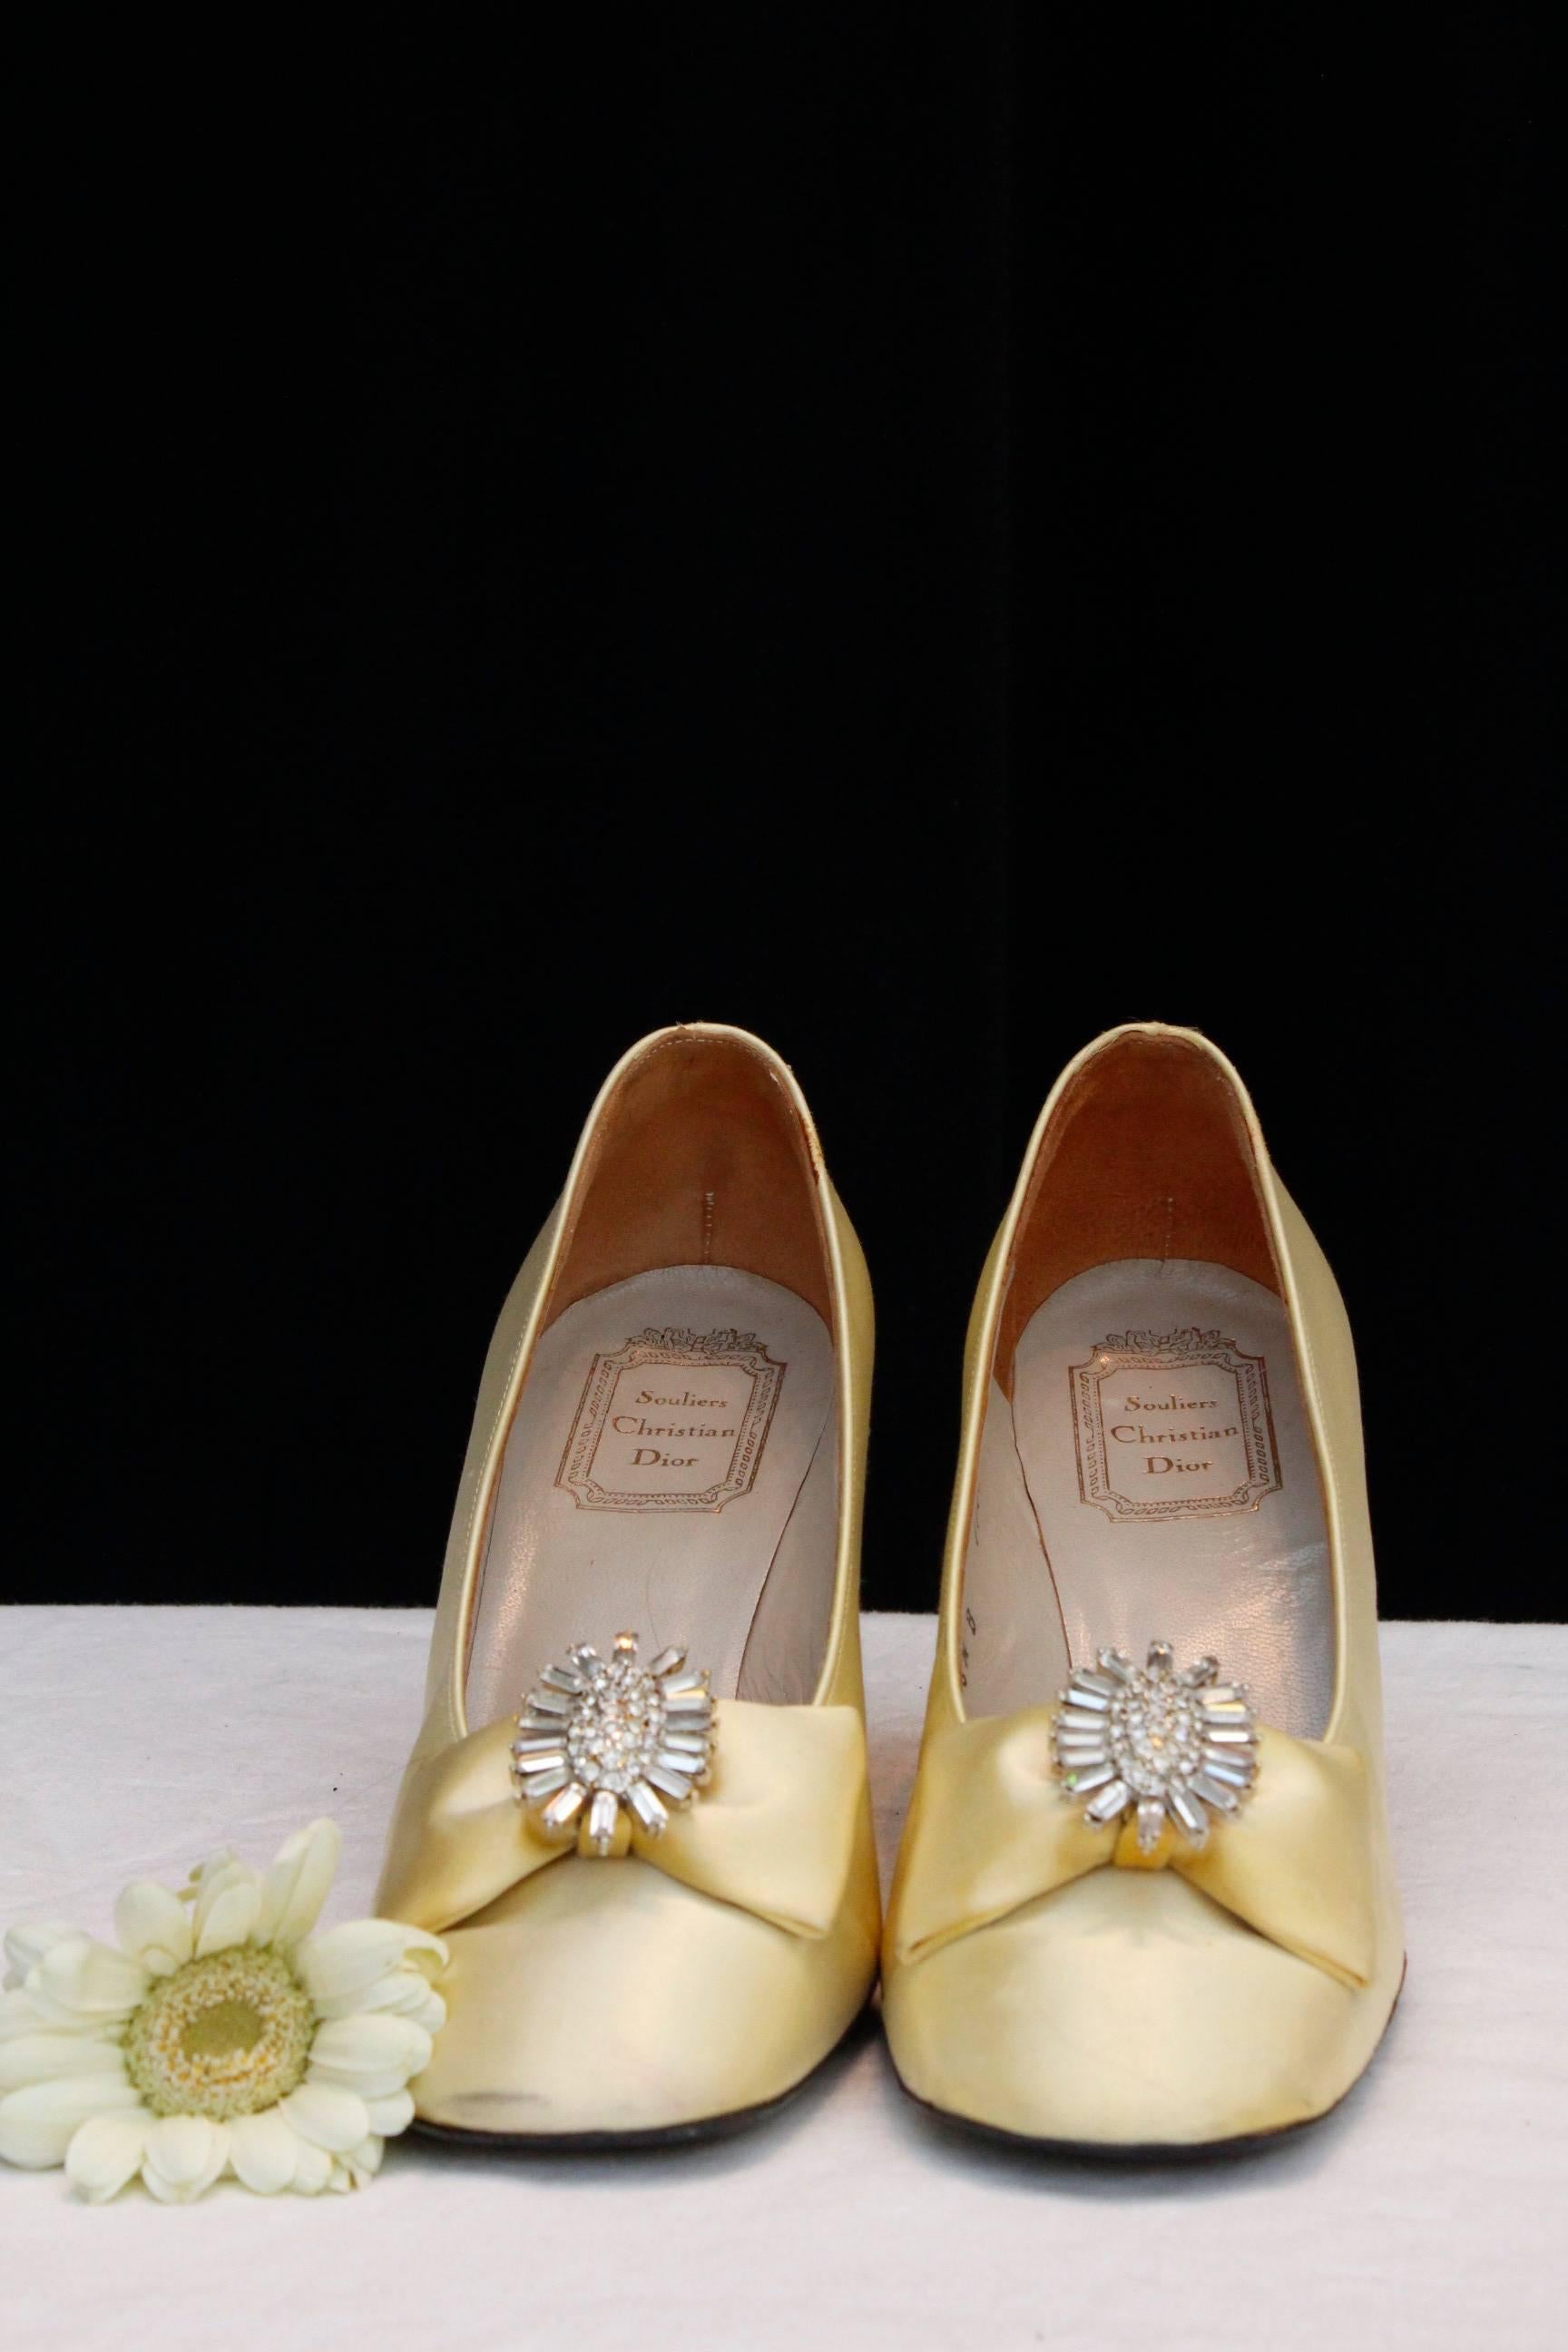 CHRISTIAN DIOR SOULIERS – Amazing square heels pumps in light yellow satin embellished with a satin bow and a stylized gilded metal bow paved with marquise cut rhinestones. Beige leather lining, black leather outer sole. Size 5.5, 37 FR.

Heels 8 cm